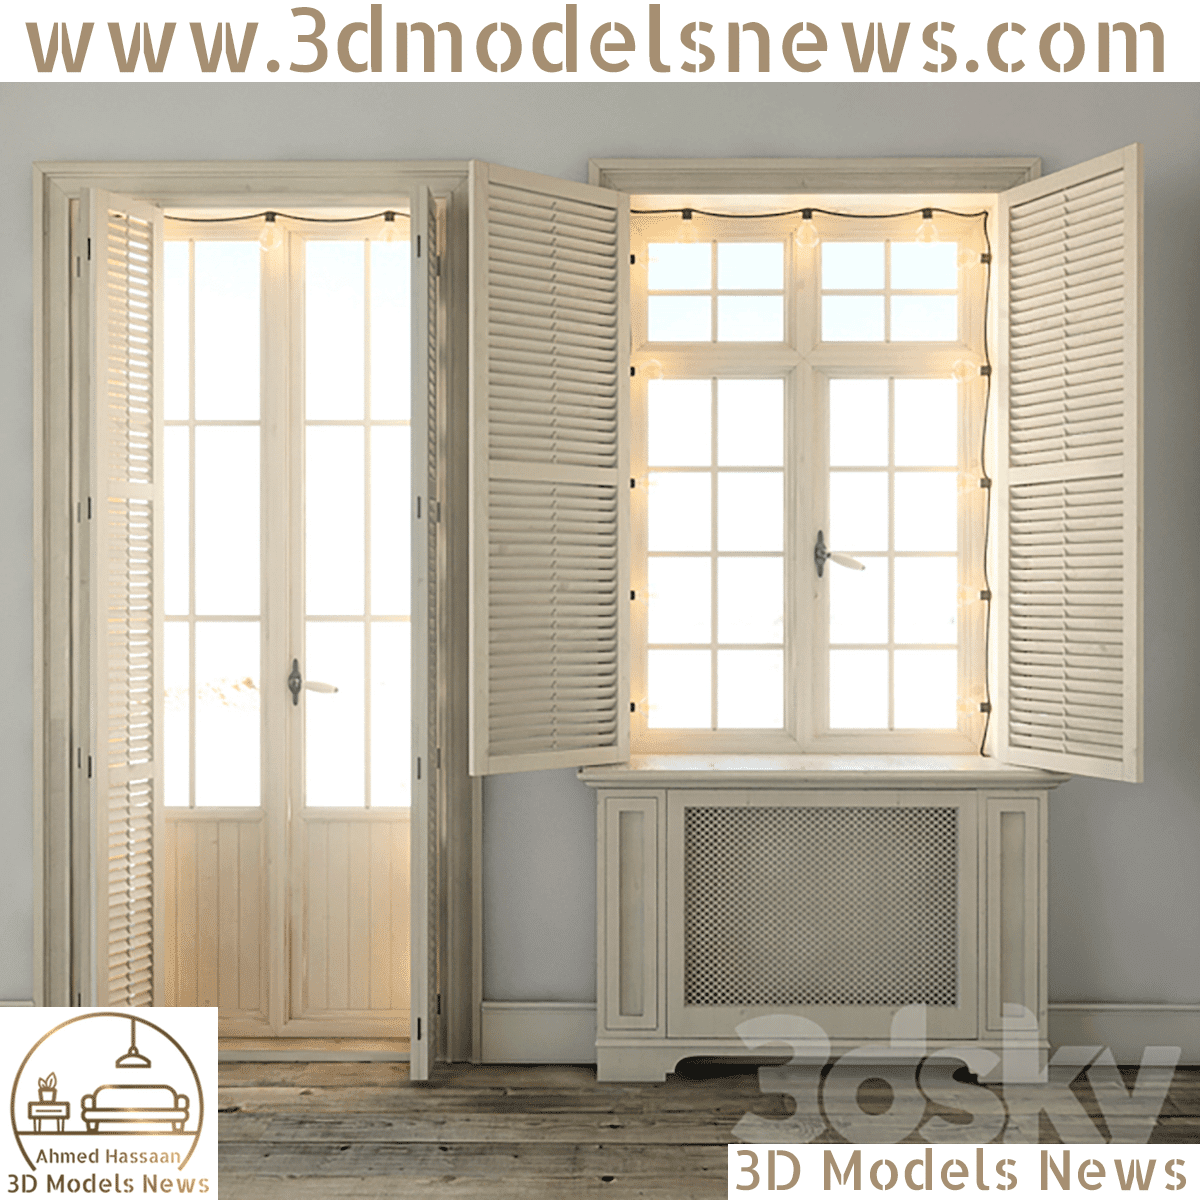 Model Windows With Shutters and Backlight